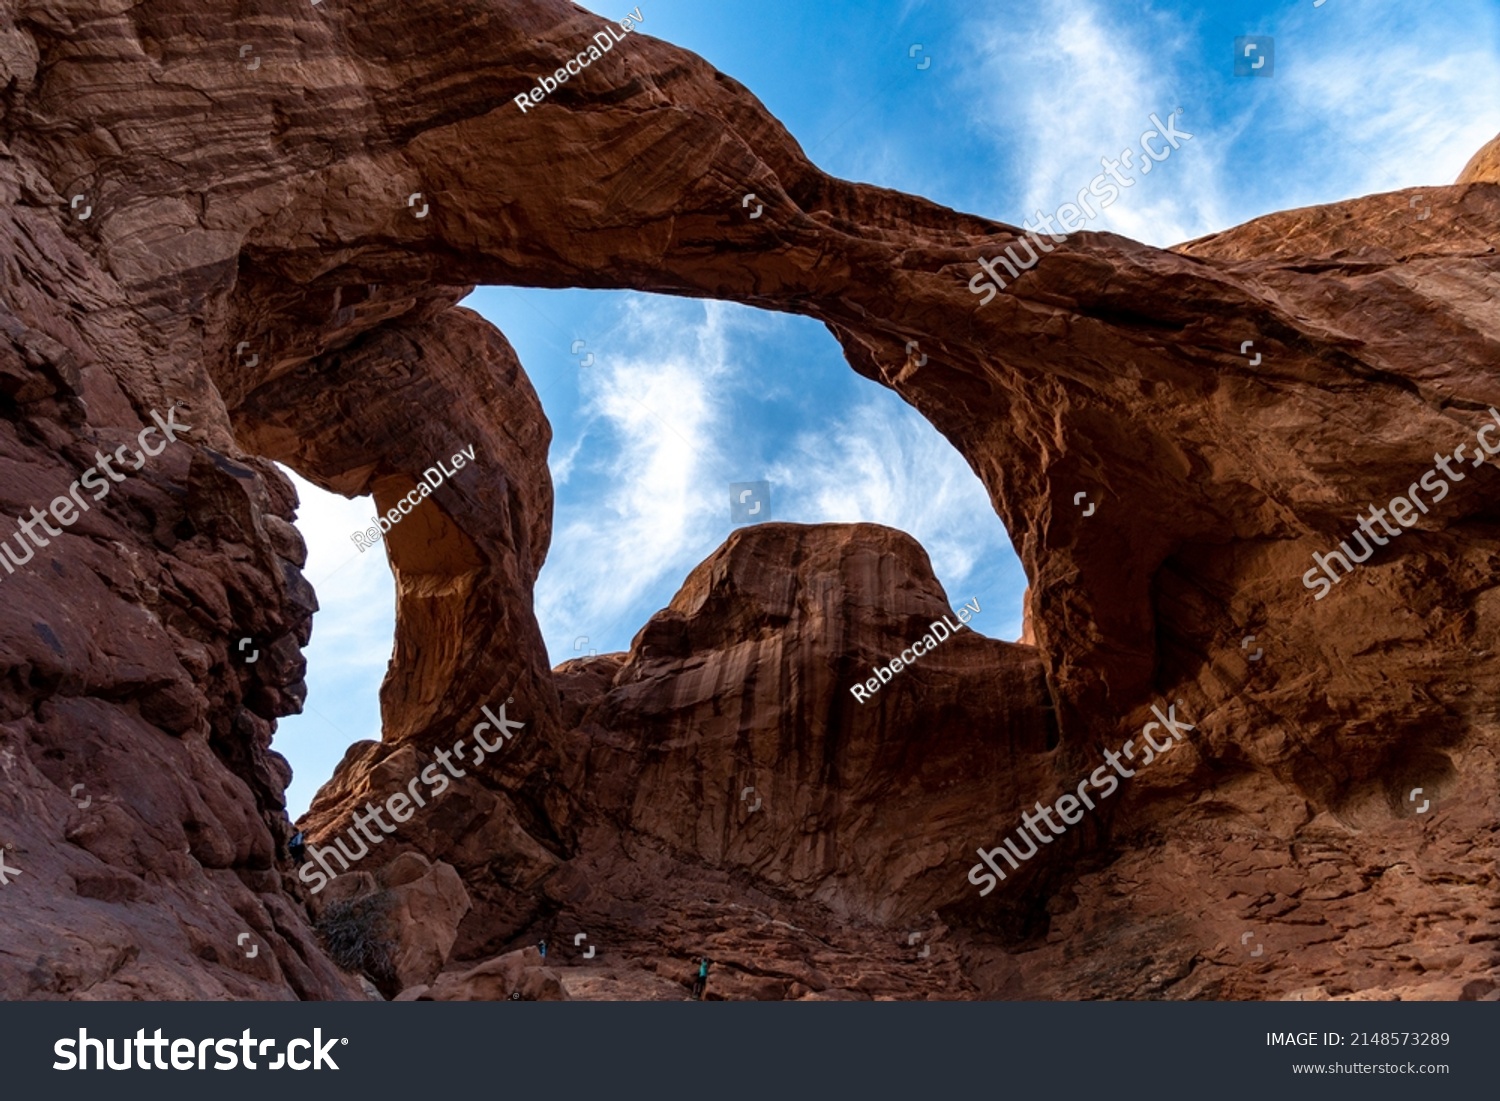 Arches National Park at Midday - Arches has many arches including the famous Delicate Arch, the Window Arch, the Double Arch and other features such as Tower of Babel, Turret Arch, and the Courthouse  #2148573289